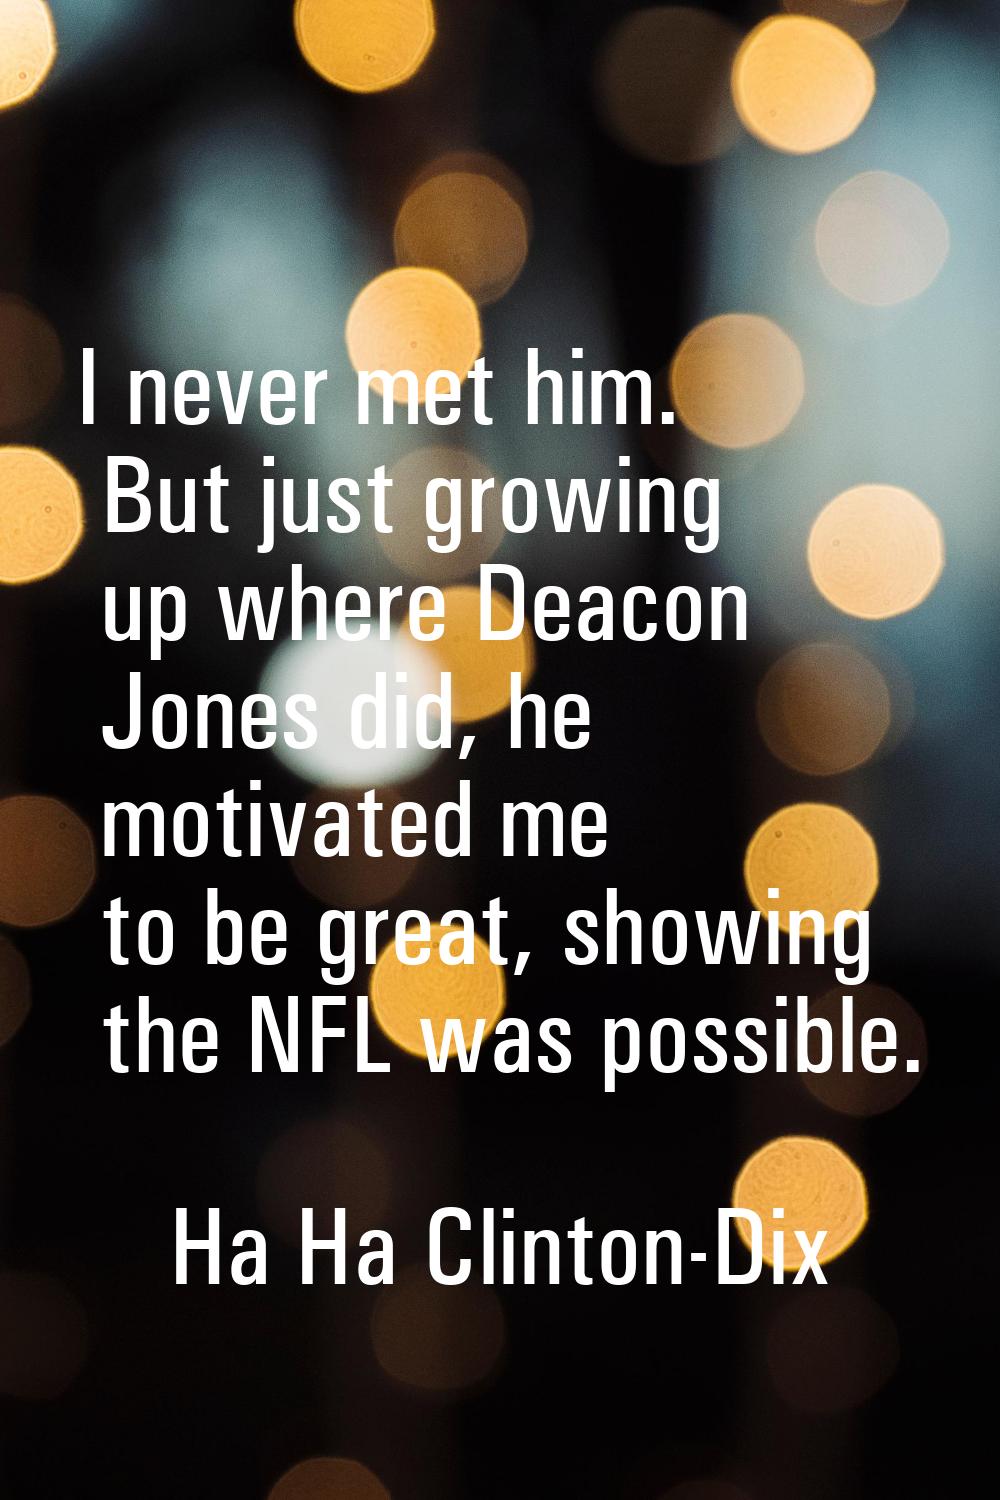 I never met him. But just growing up where Deacon Jones did, he motivated me to be great, showing t